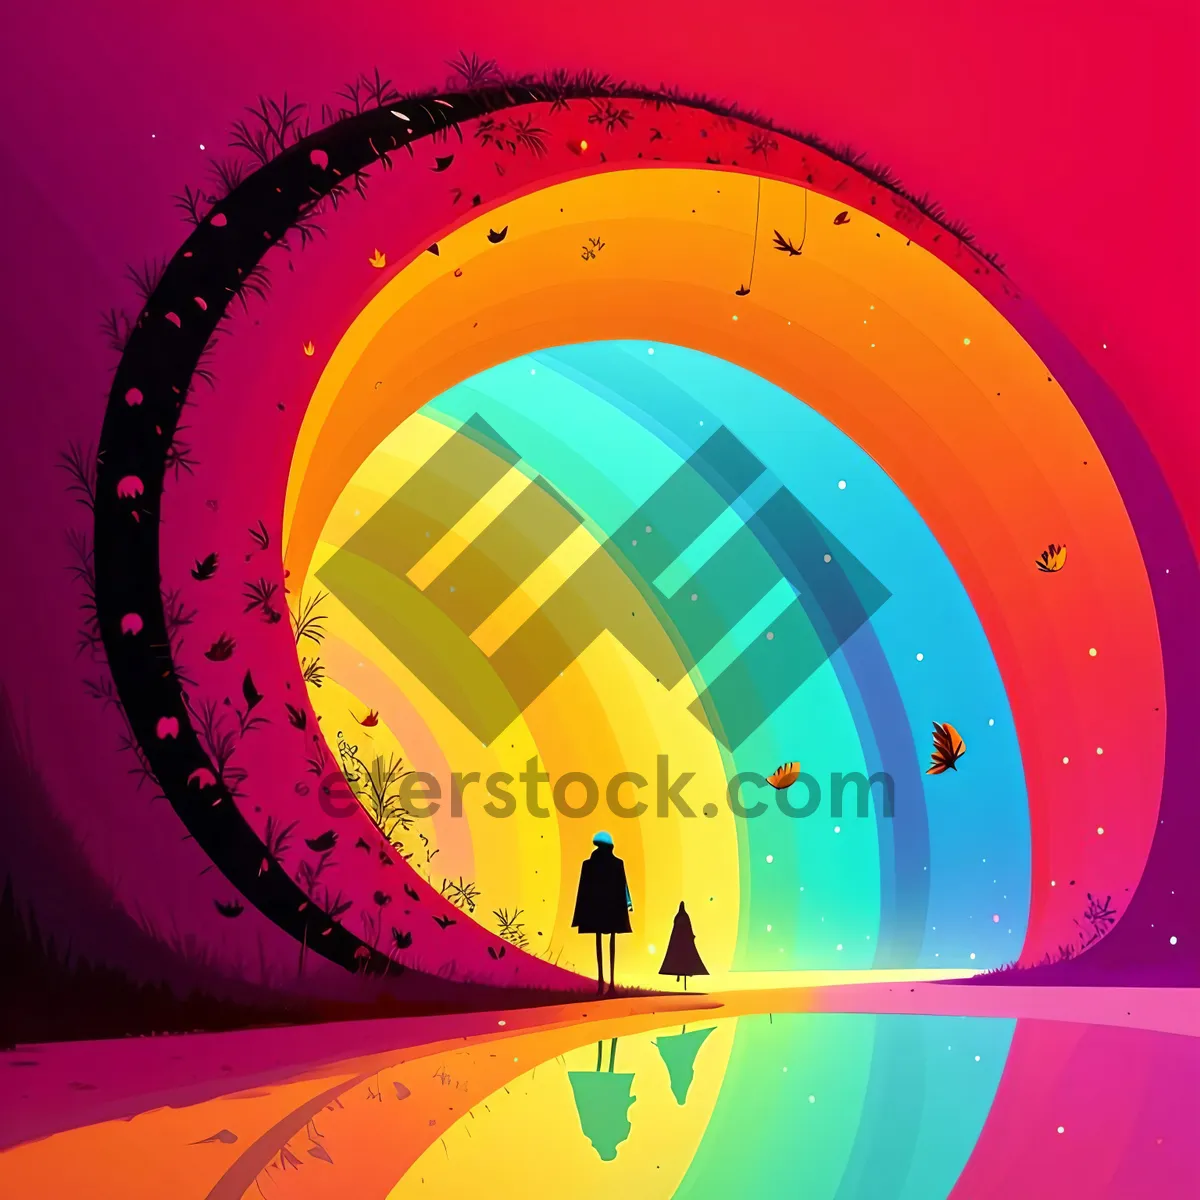 Picture of Colorful Circle Pattern on Digital Art Wallpaper